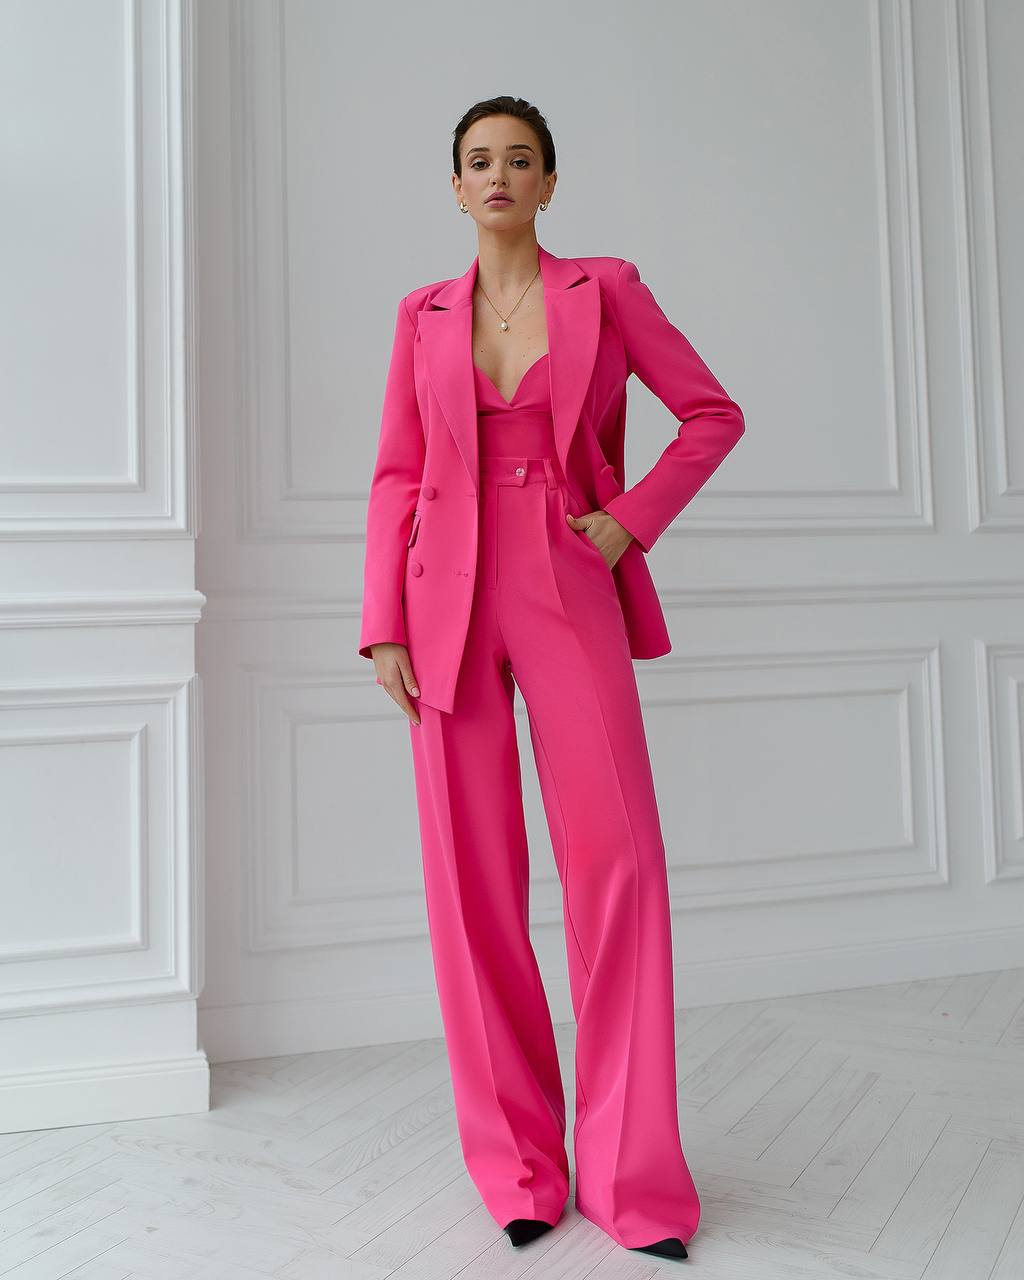 a woman in a pink suit standing in a white room